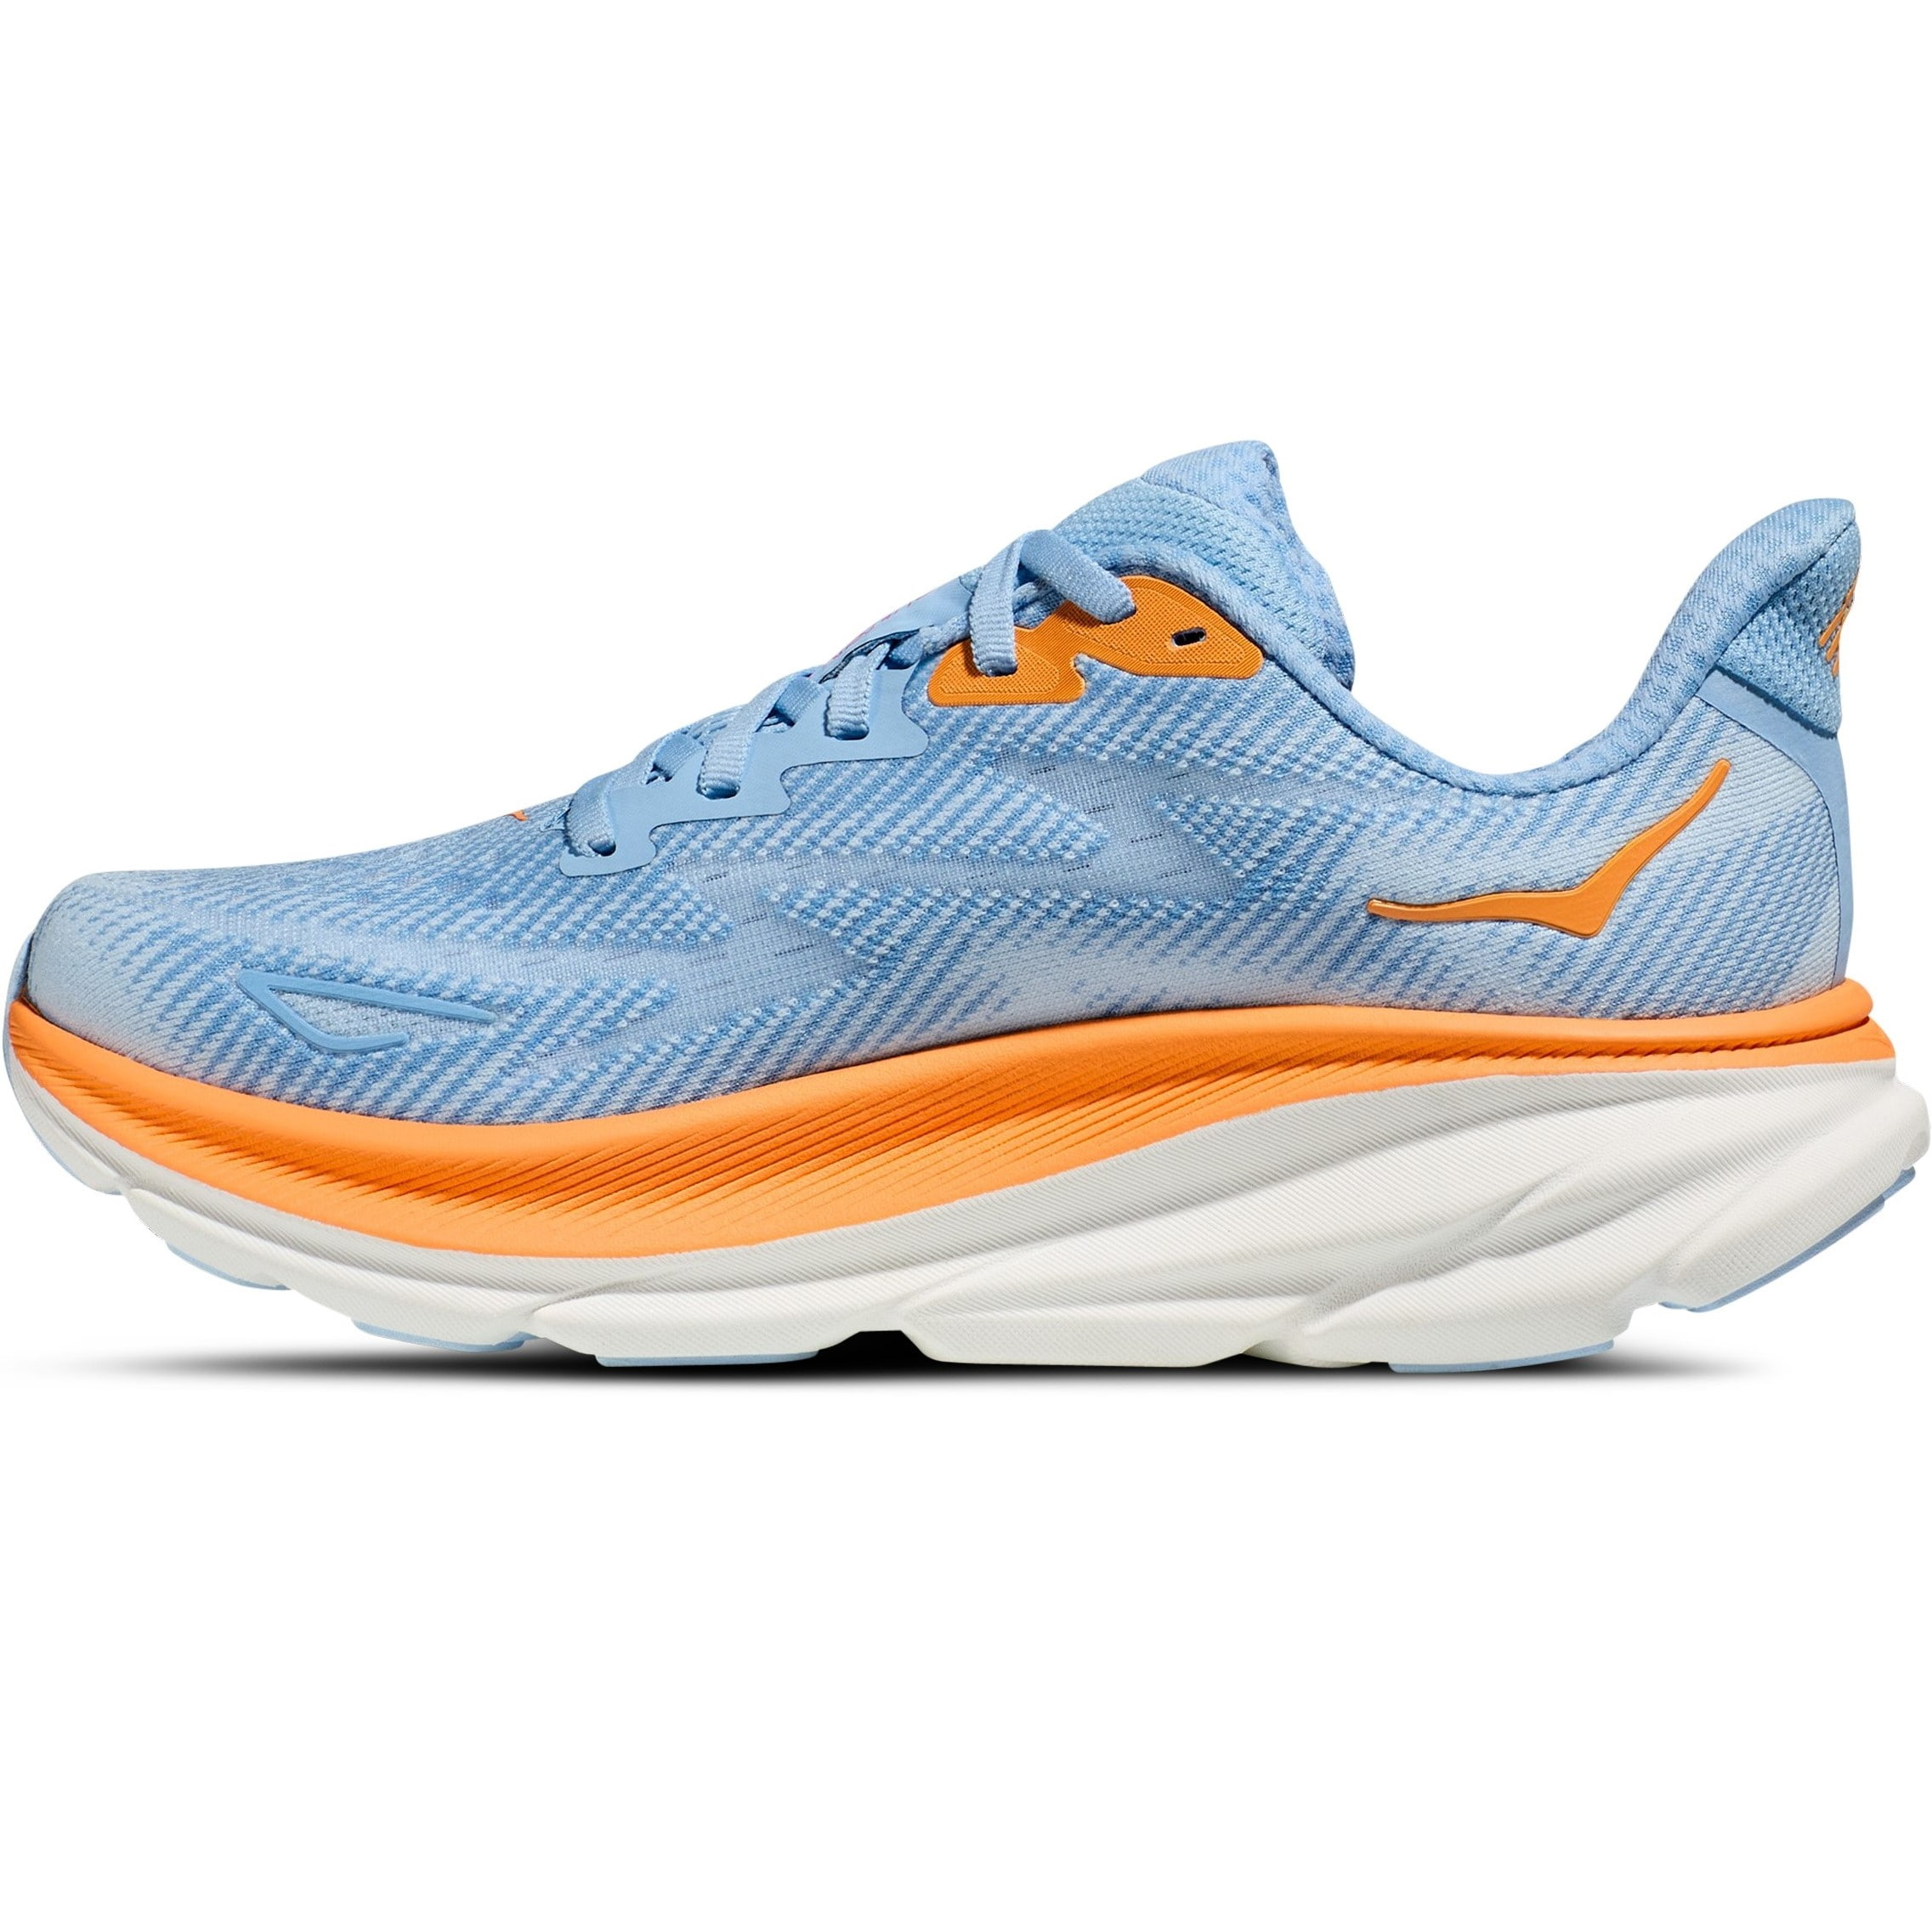 GIÀY HOKA NỮ CLIFTON 9 AIRY BLUE ICE WATER WOMEN ROAD RUNNING SHOES 1127896-ABIW 3